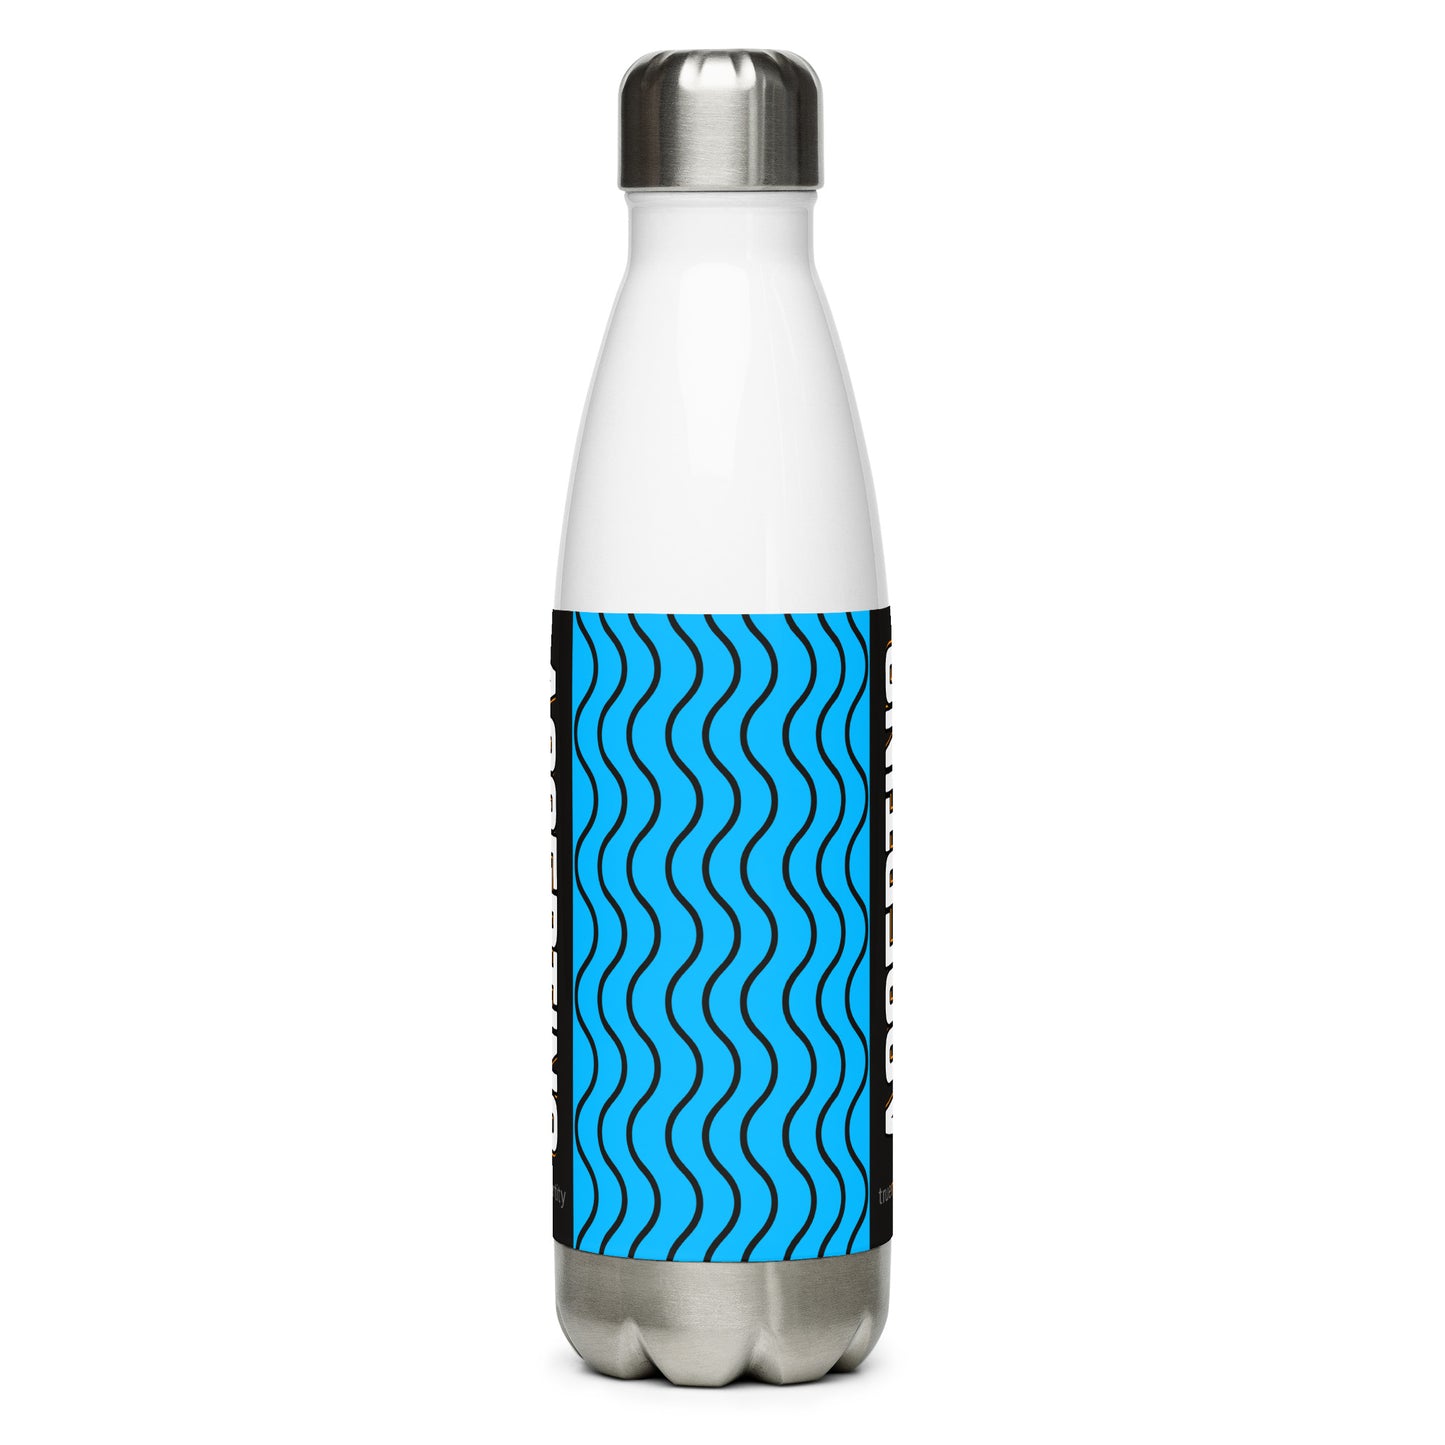 ACCEPTING Stainless Steel Water Bottle Blue Wave Design, 17 oz, in Black or White